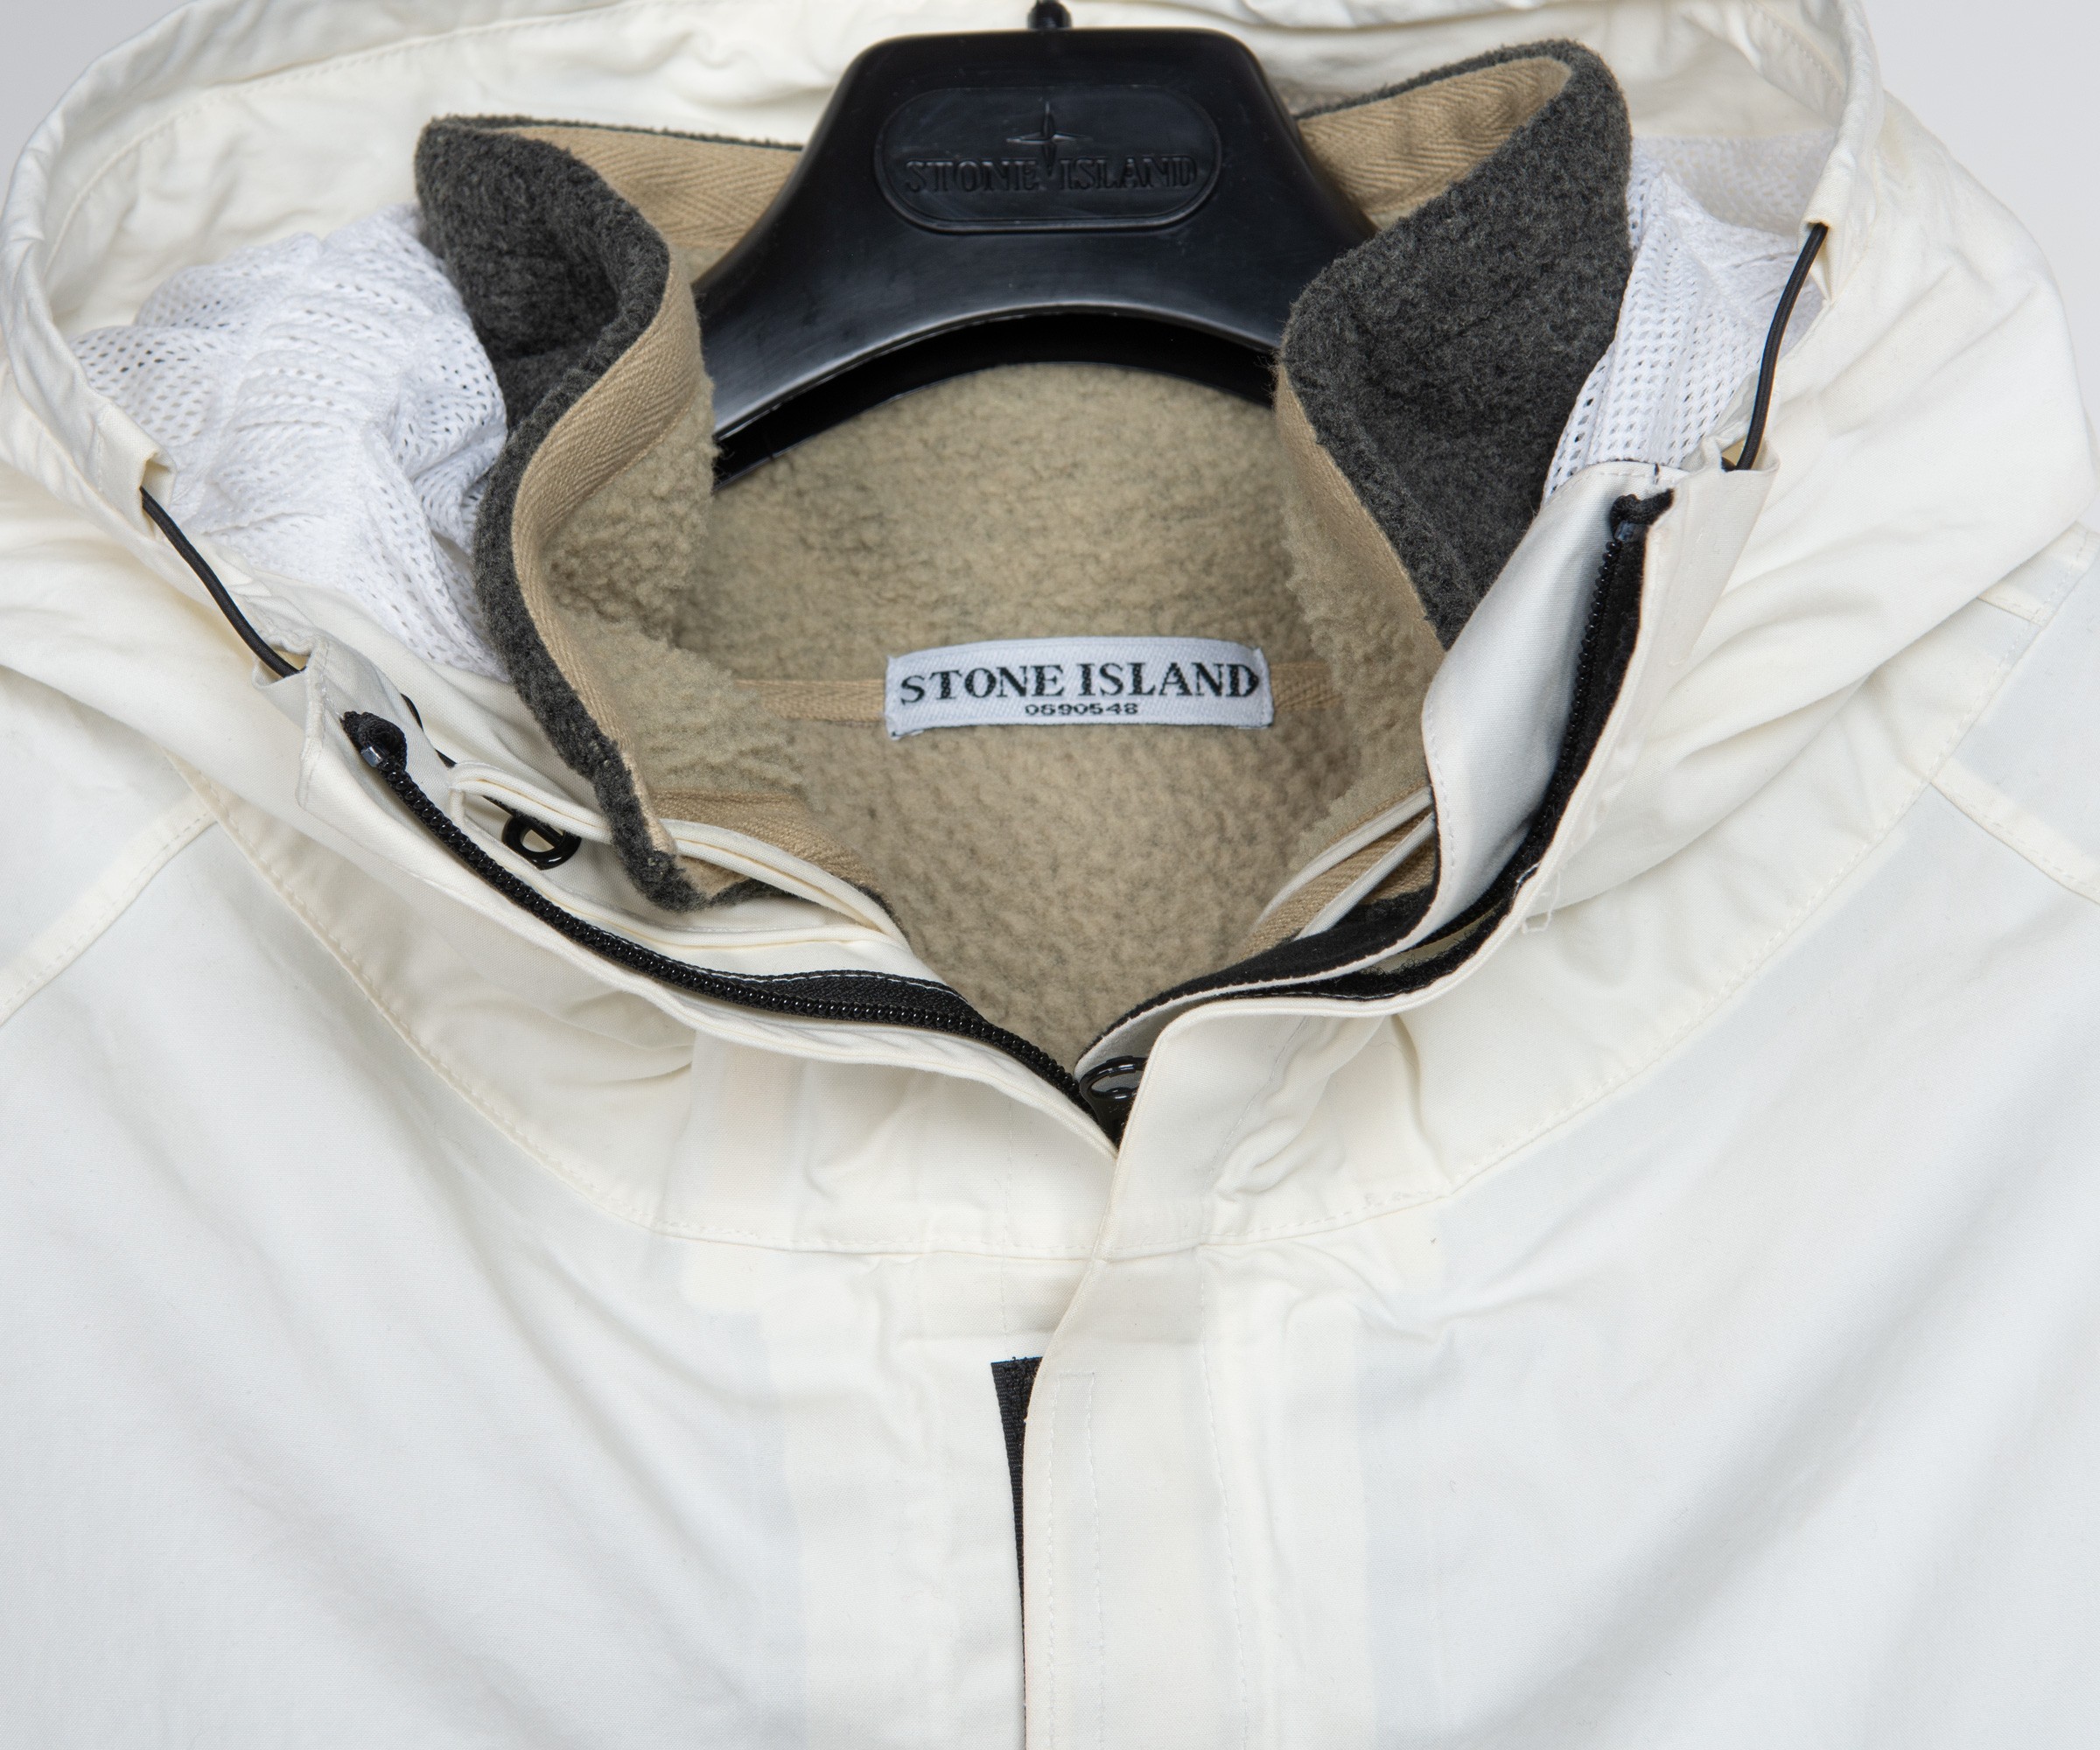 Stone Island Archivio 06 Full Zip Hooded Jacket with Waterproof Zips and Dutch  Rope Inlay. White